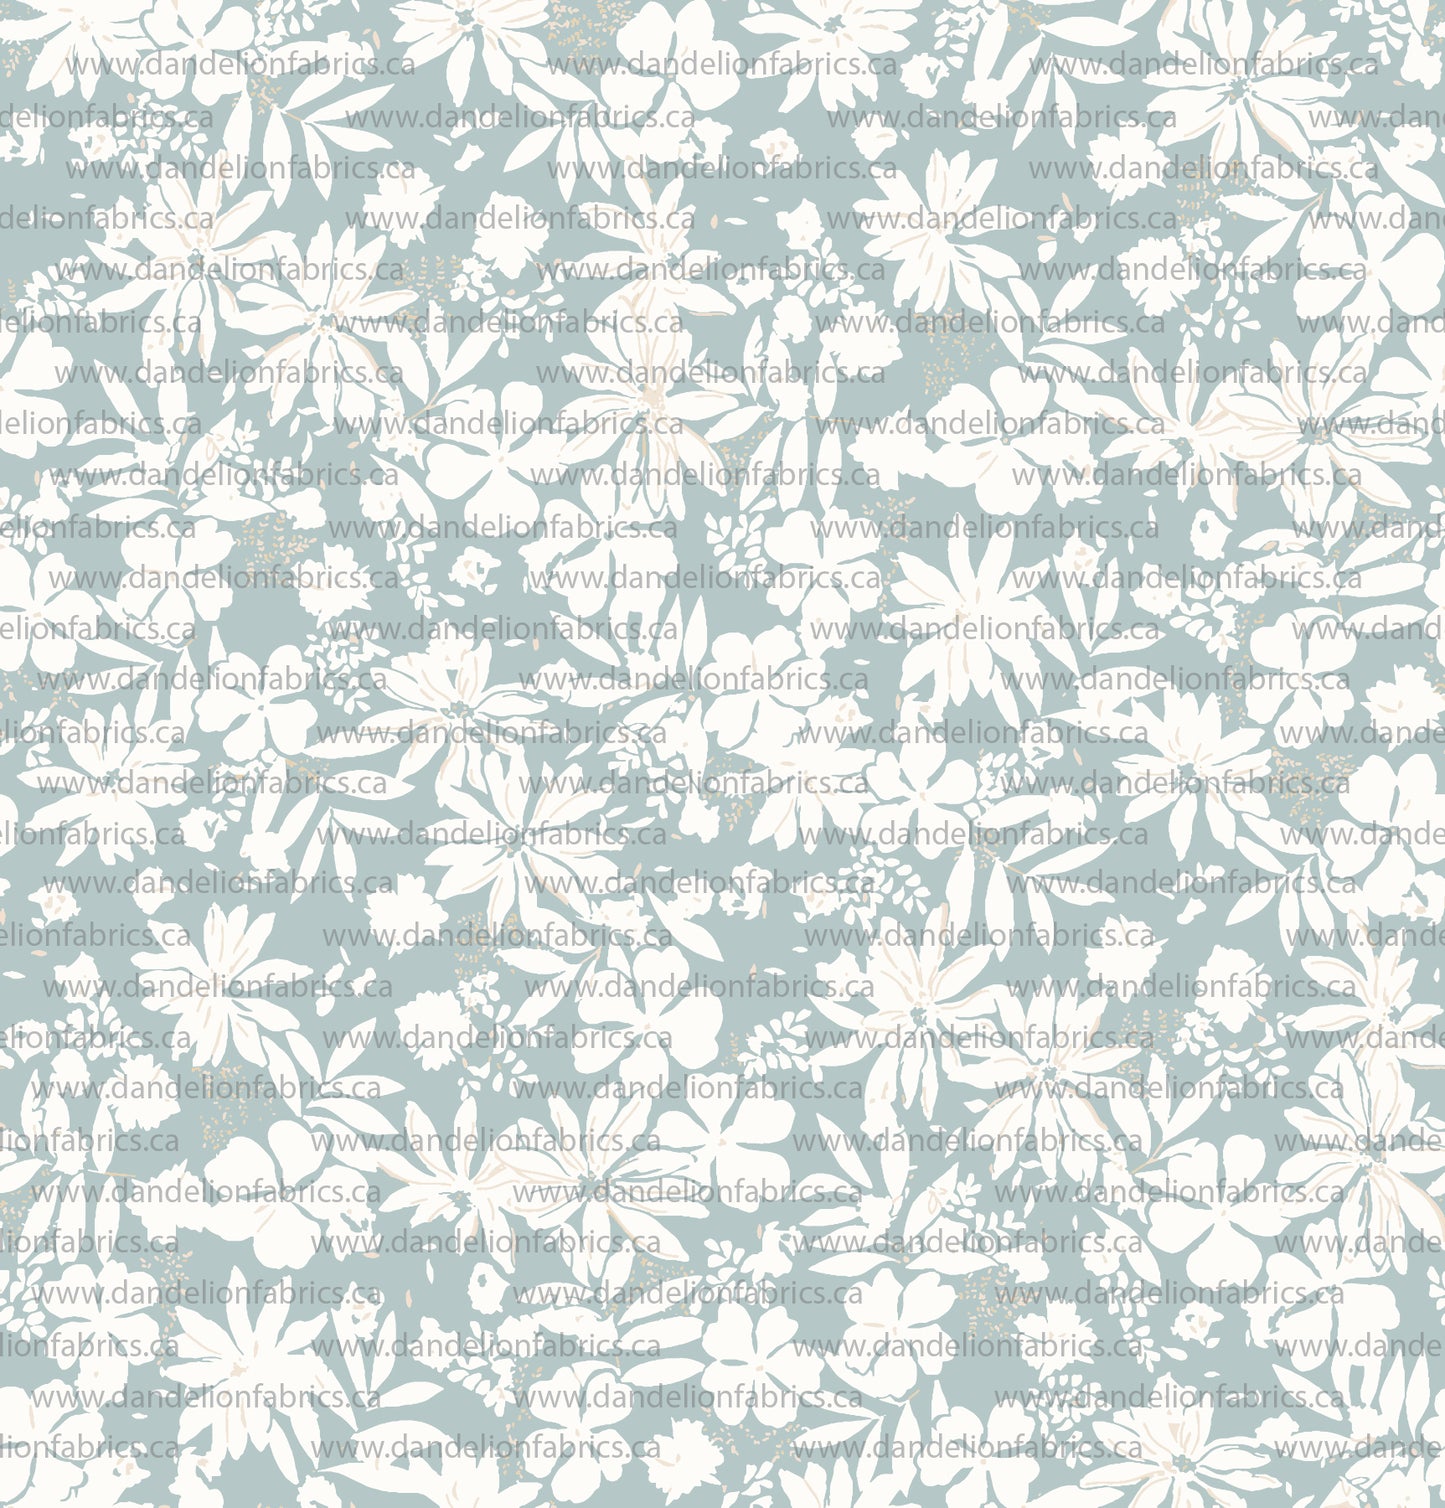 Dianna Floral in Morning Sky | Mini Rib Knit Fabric | SOLD BY THE FULL BOLT